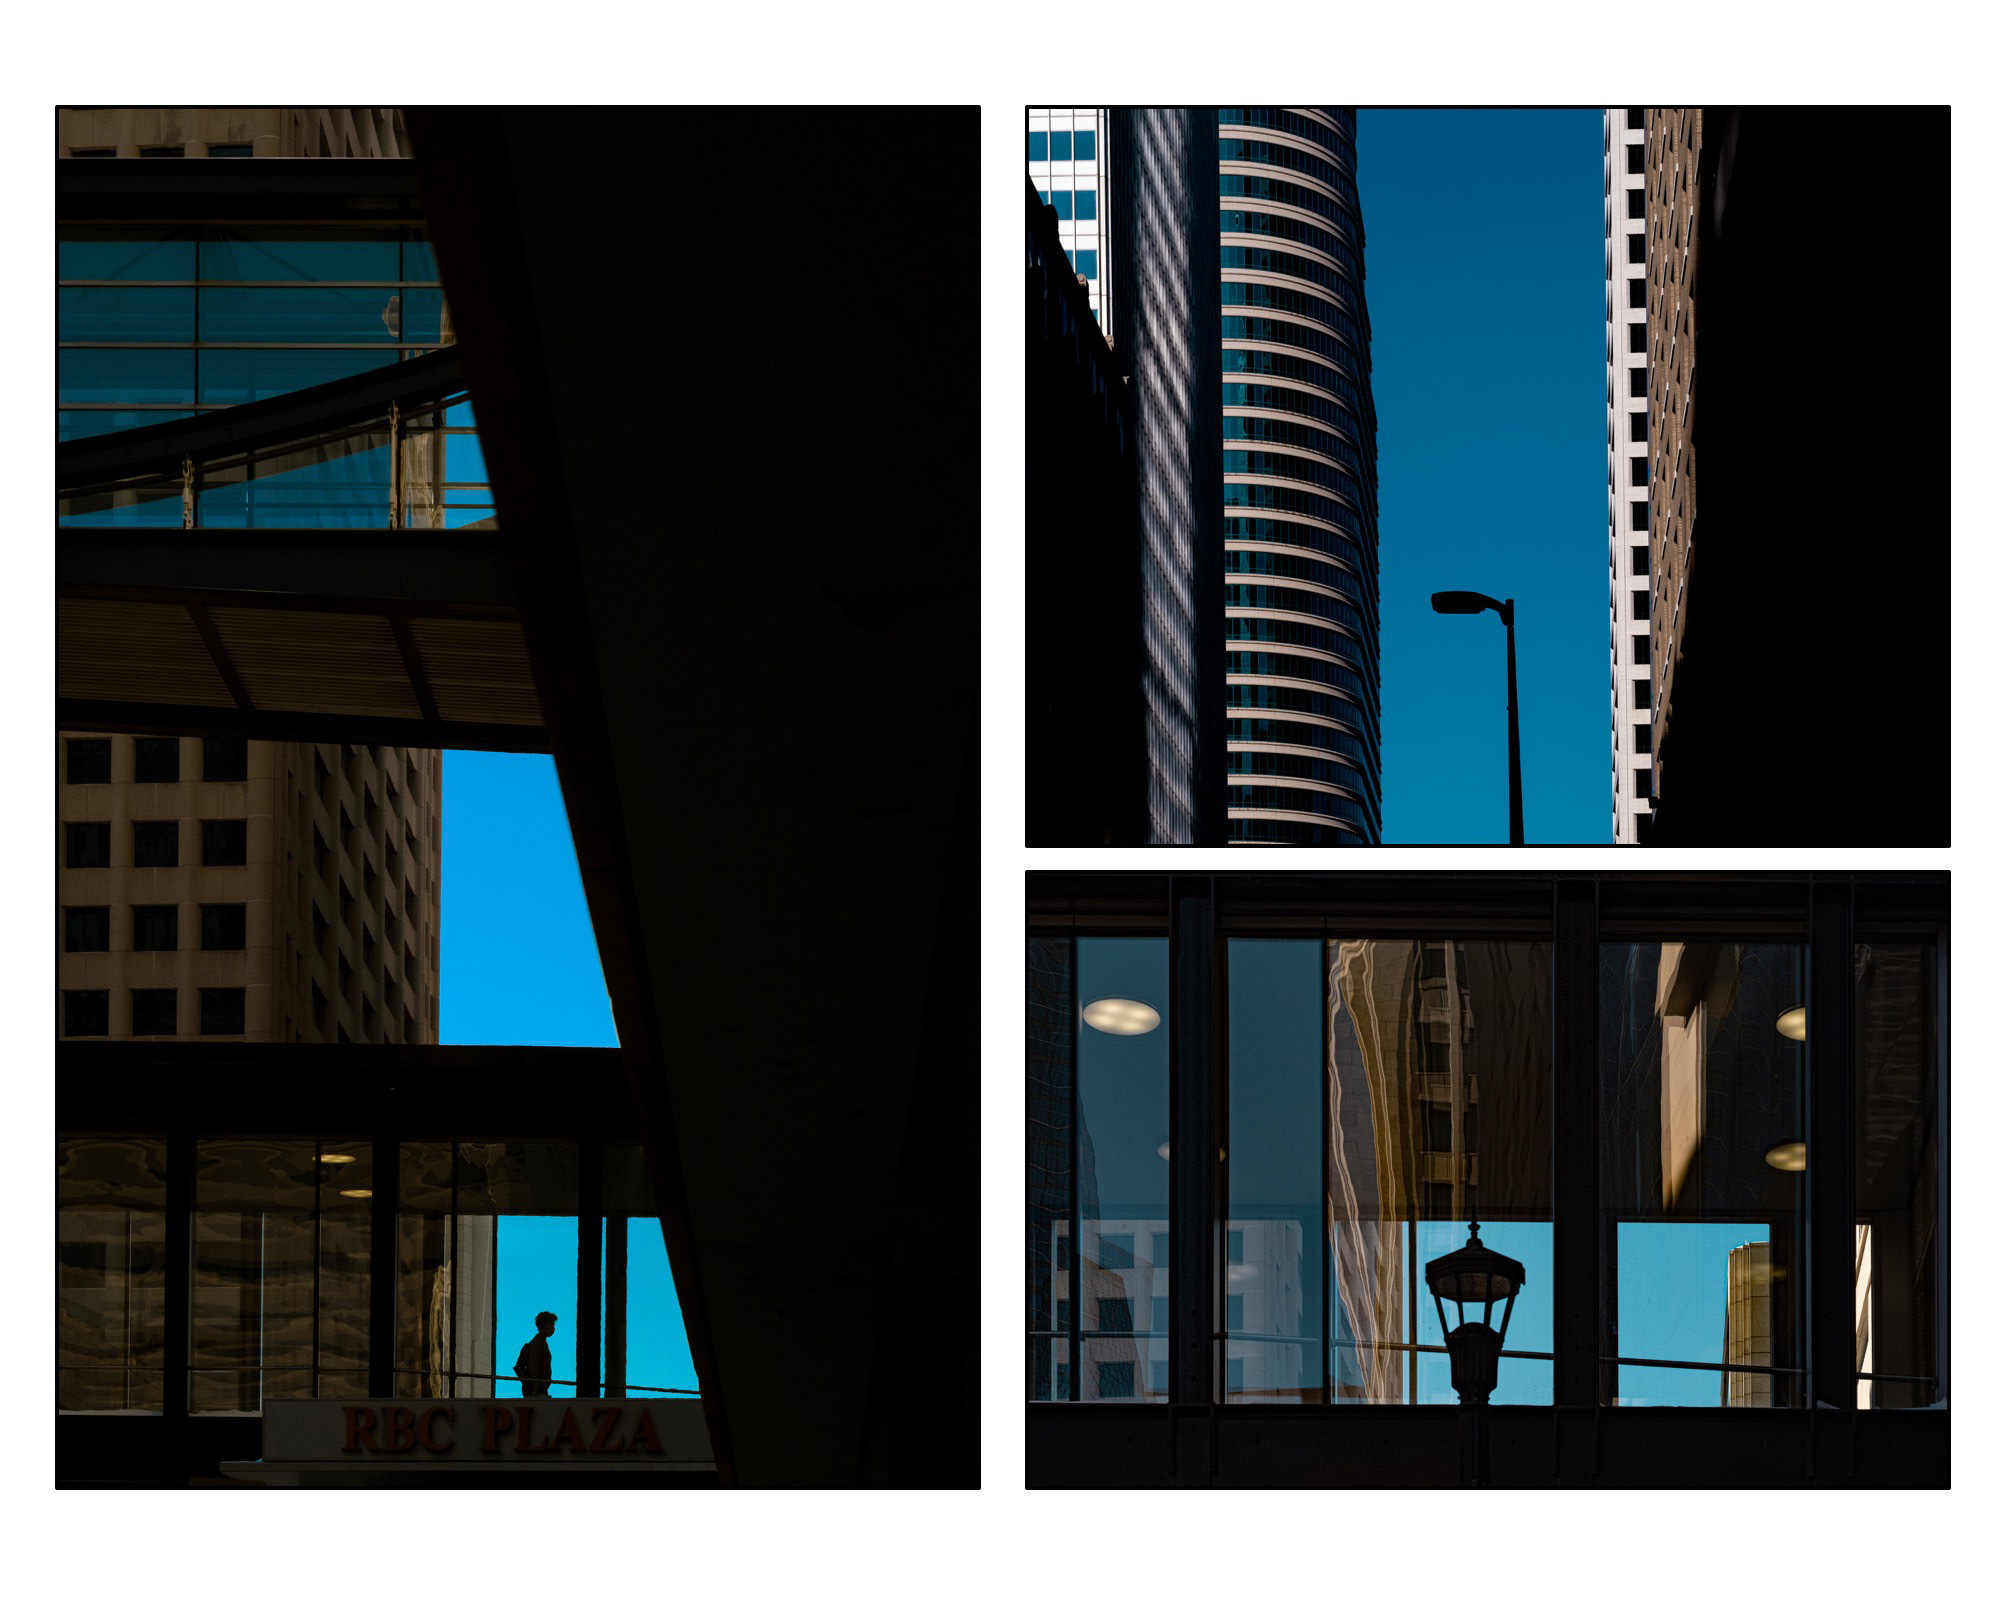 A silhouetted person and street lights are framed by buildings and skyways in downtown Minneapolis on a sunny, blue sky day.